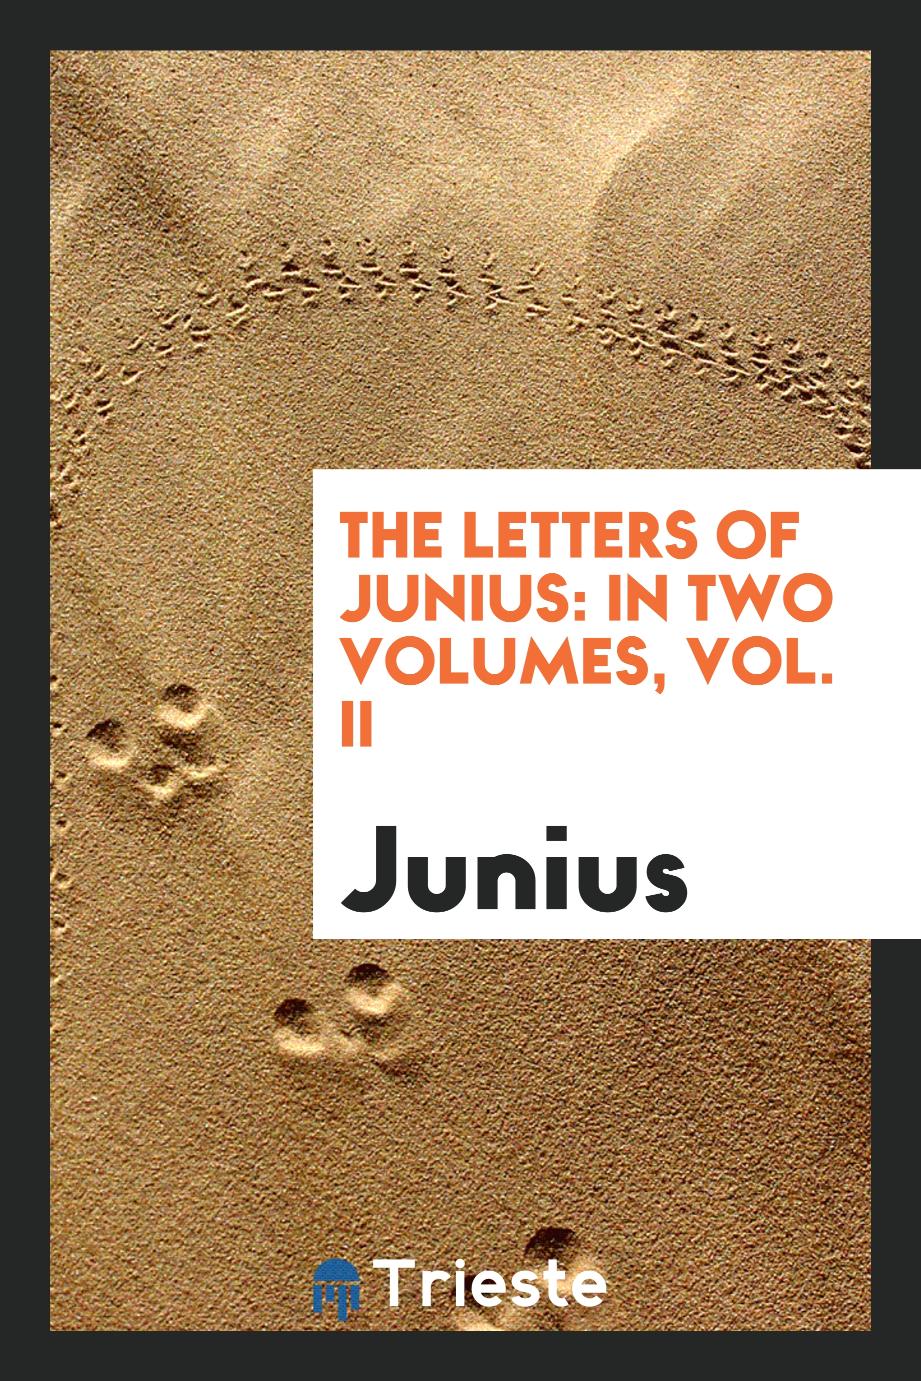 The letters of Junius: in two volumes, Vol. II